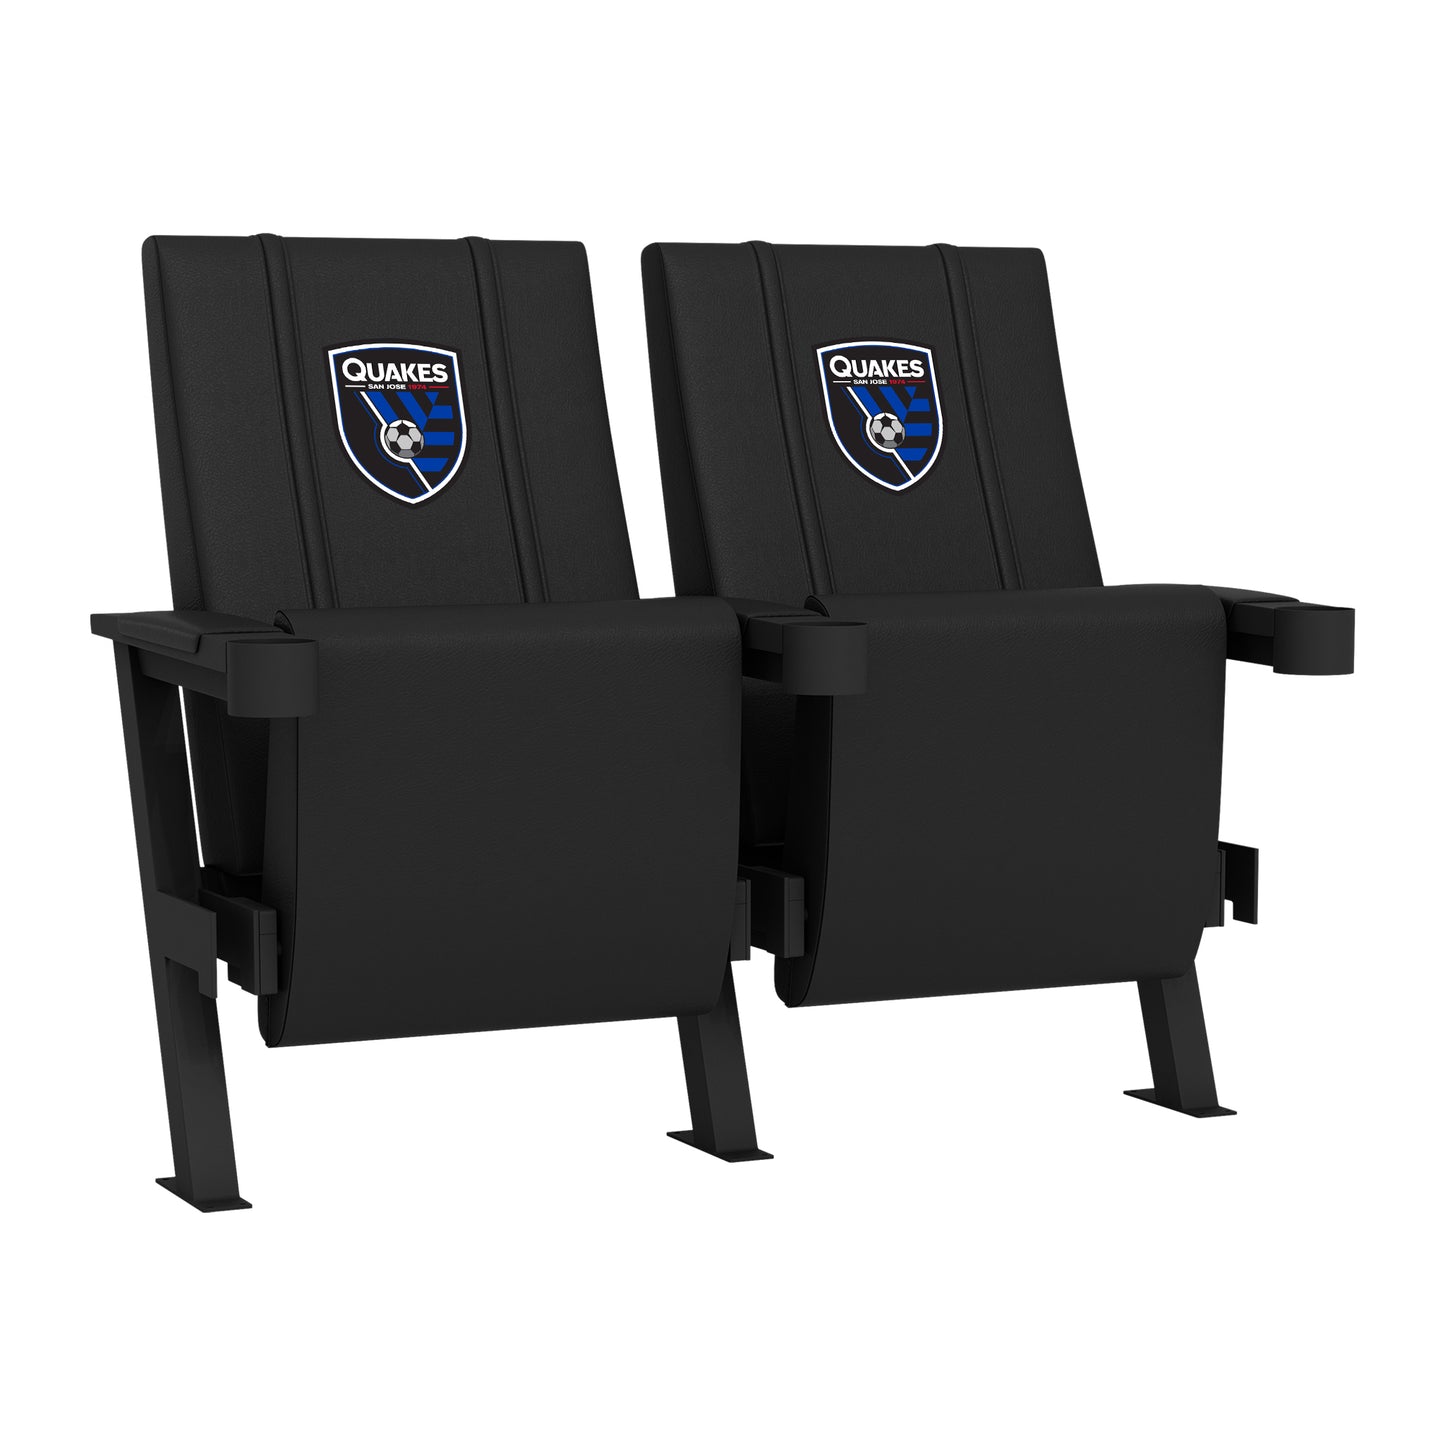 SuiteMax 3.5 VIP Seats with San Jose Earthquakes Logo